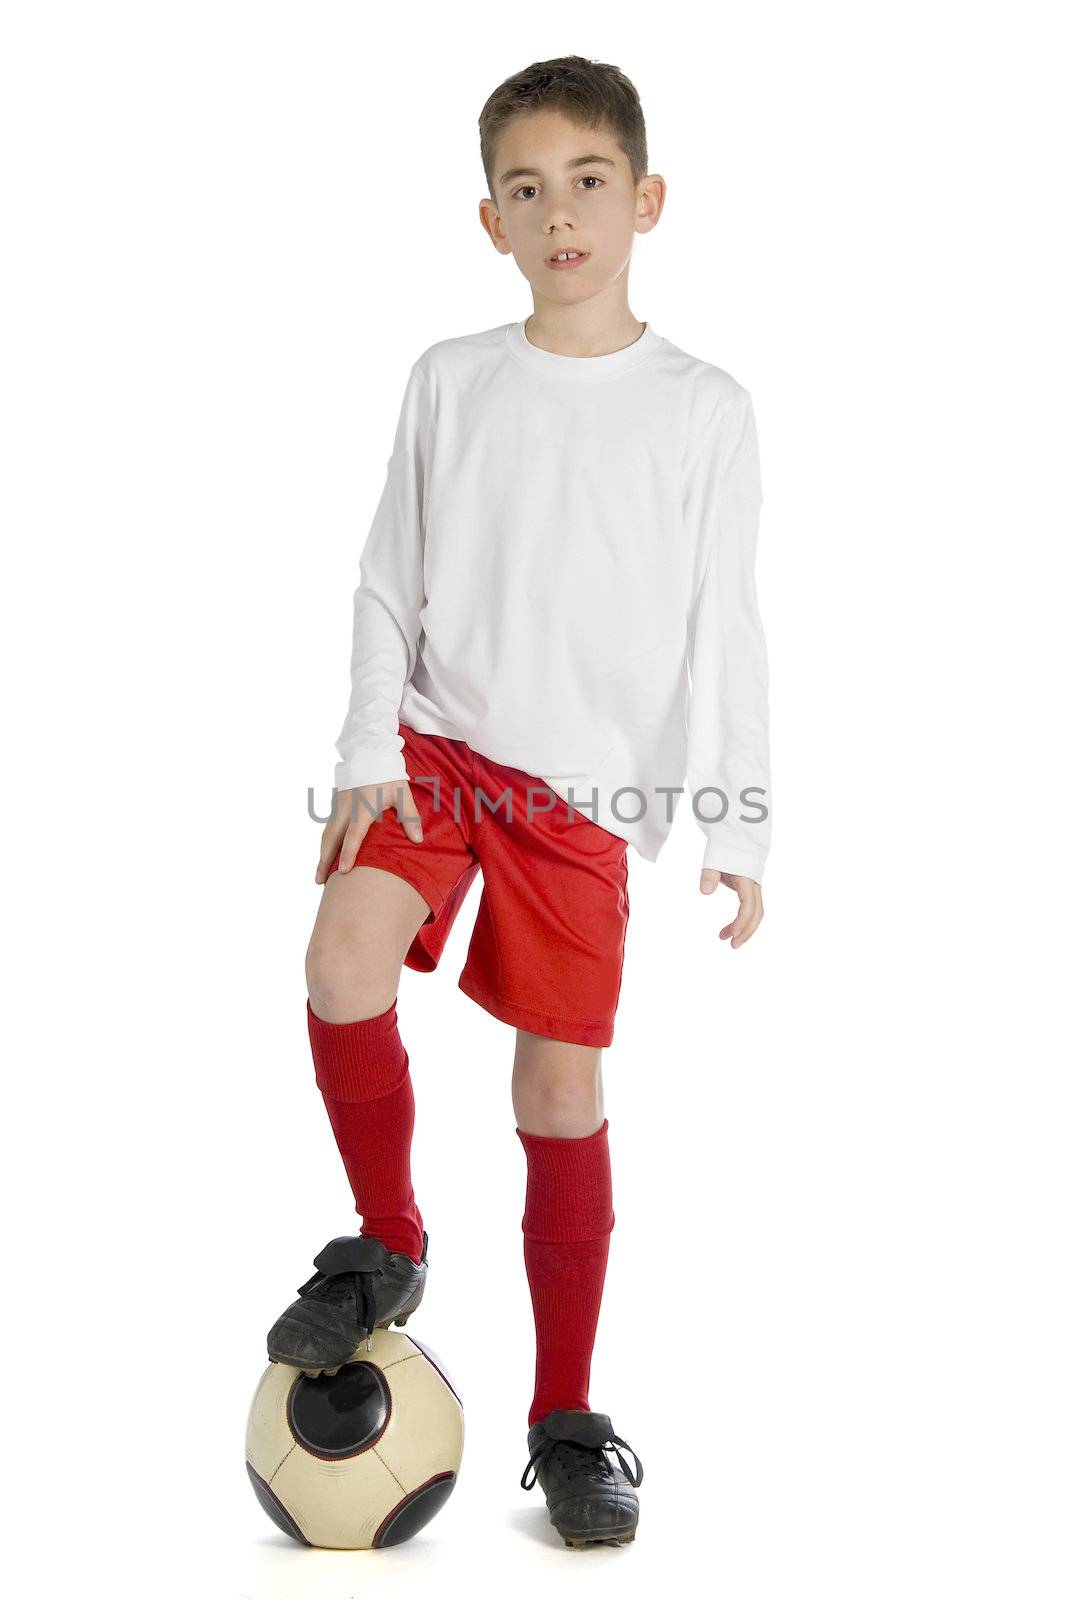 a boy in football uniform with his foot on a football